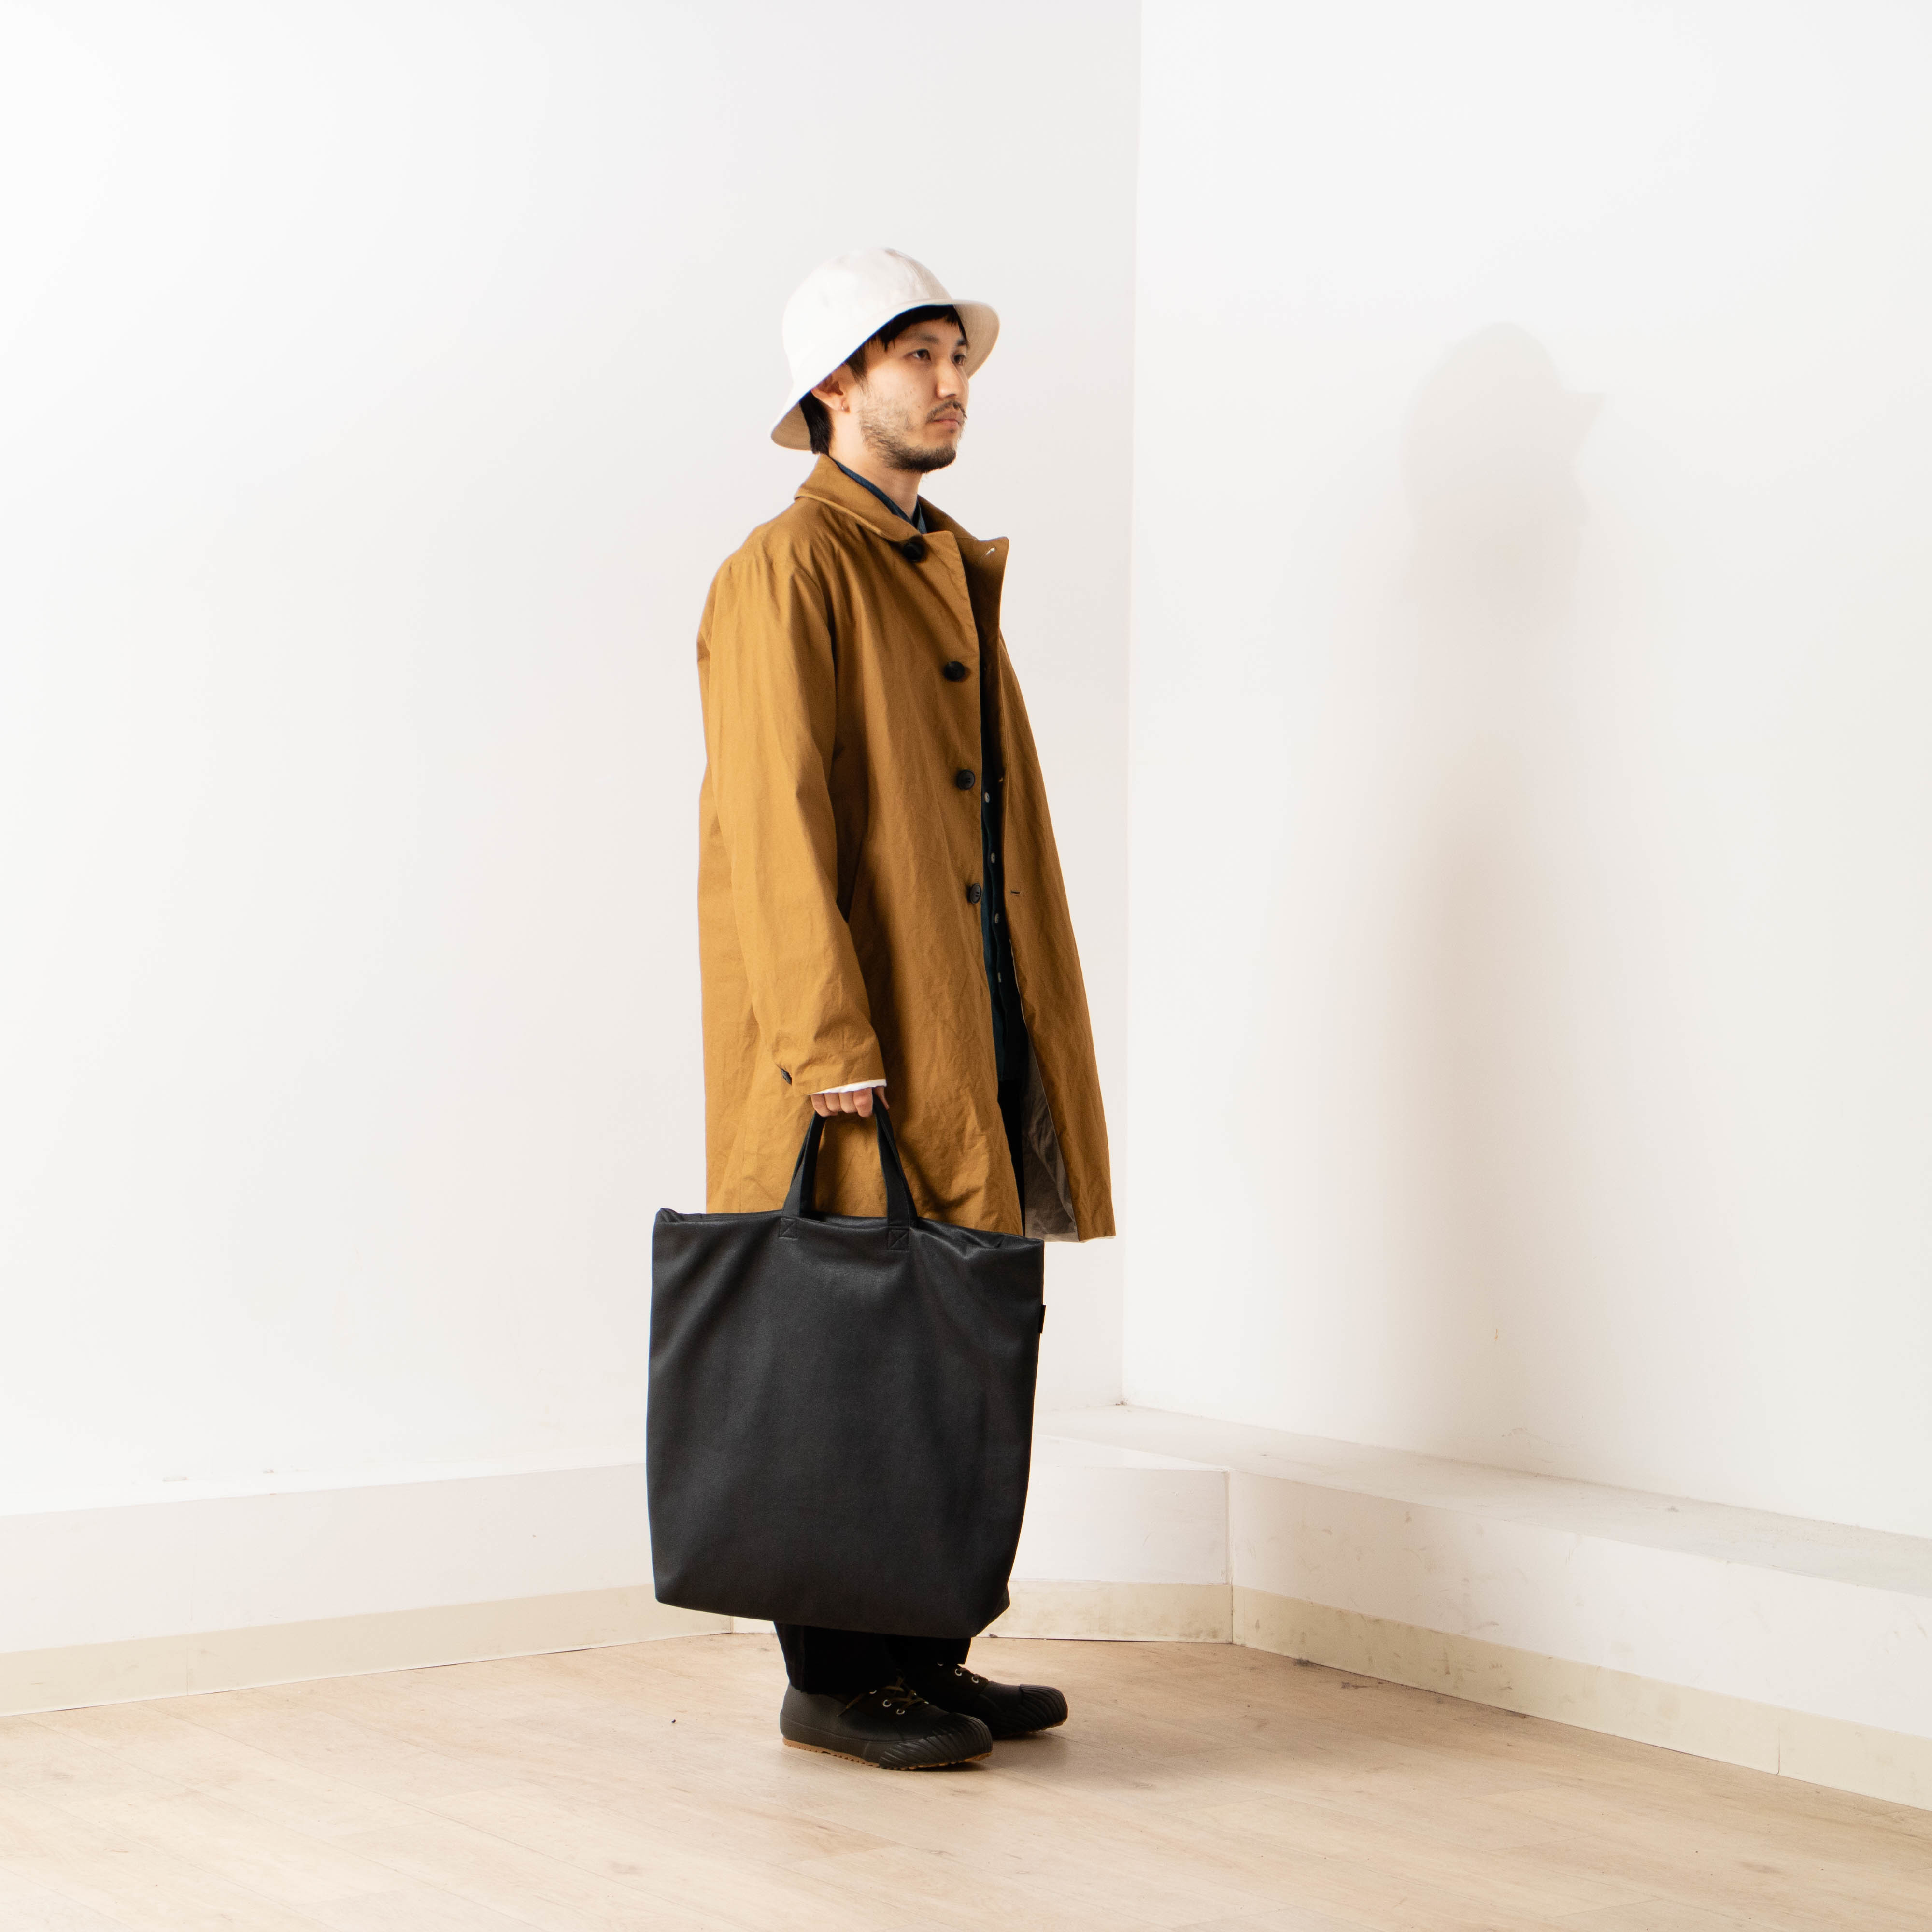 KaILI (カイリ) / 「S/H TWO DEVICE TOTE UN」 のご紹介 - WEEKENDER 